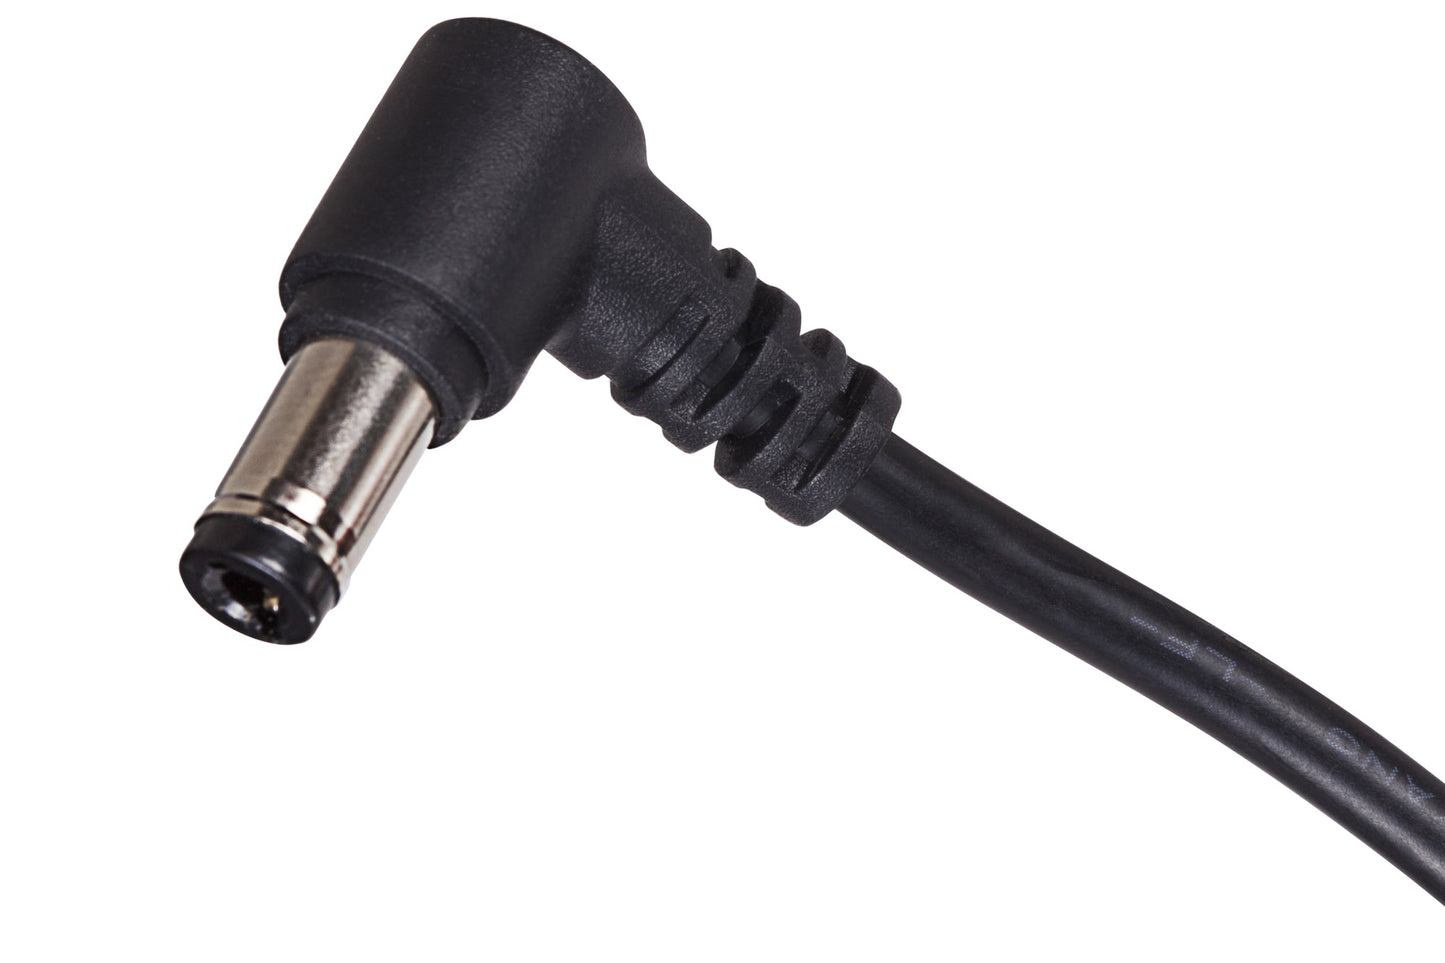 MPS Maplin EU Switching Power Supply 5V DC 2 Amp 2.1 x 5.5 x 10mm Plug - 3m Cable - maplin.co.uk